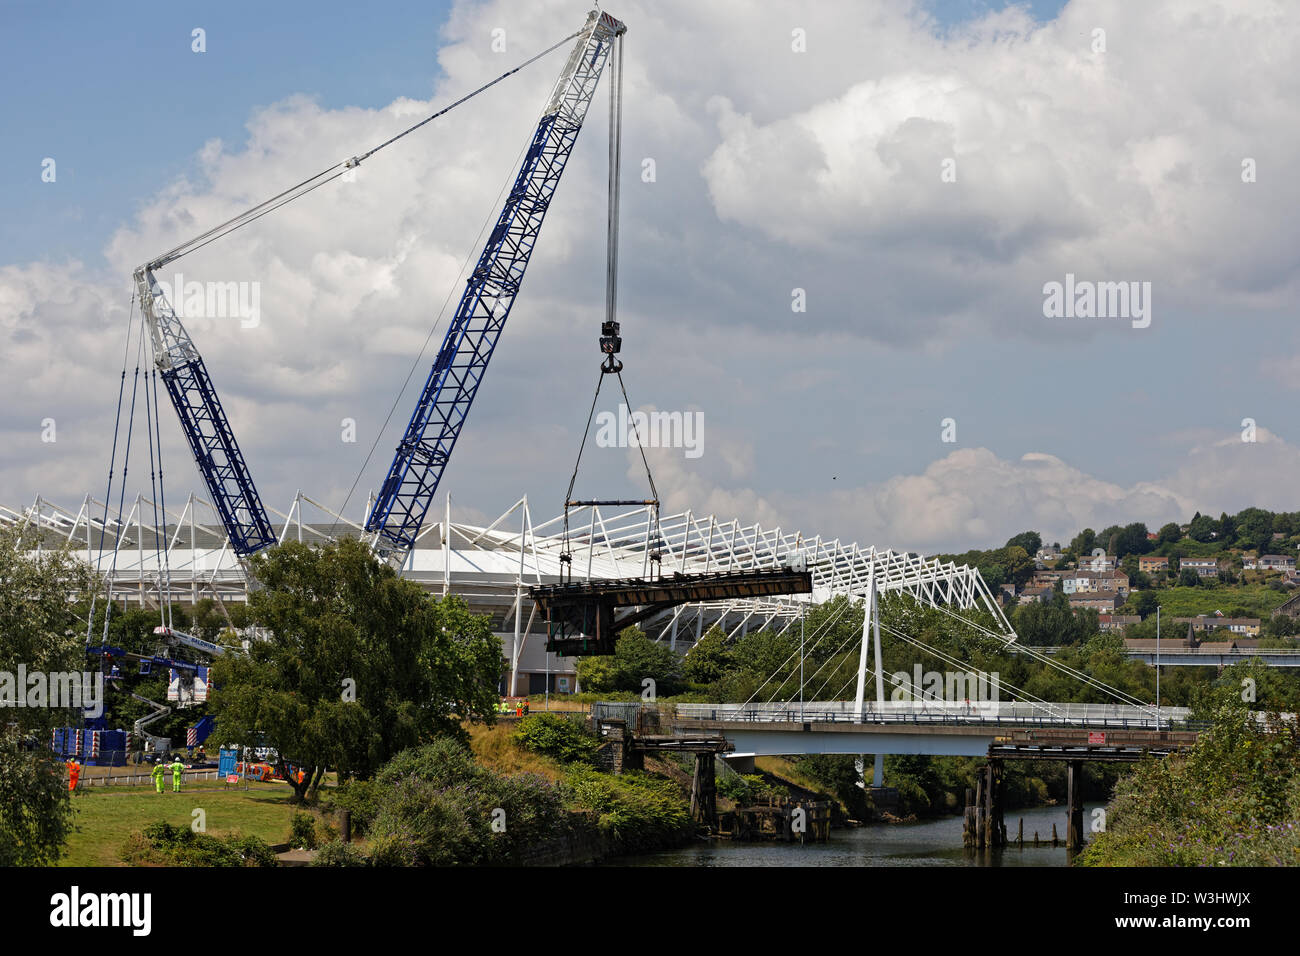 Pictured: A crane lifts the Bascule Bridge over river Tawe in the Morfa area of Swansea, south Wales. Sunday 14 July 2019 Re: A 110 year old bridge ha Stock Photo